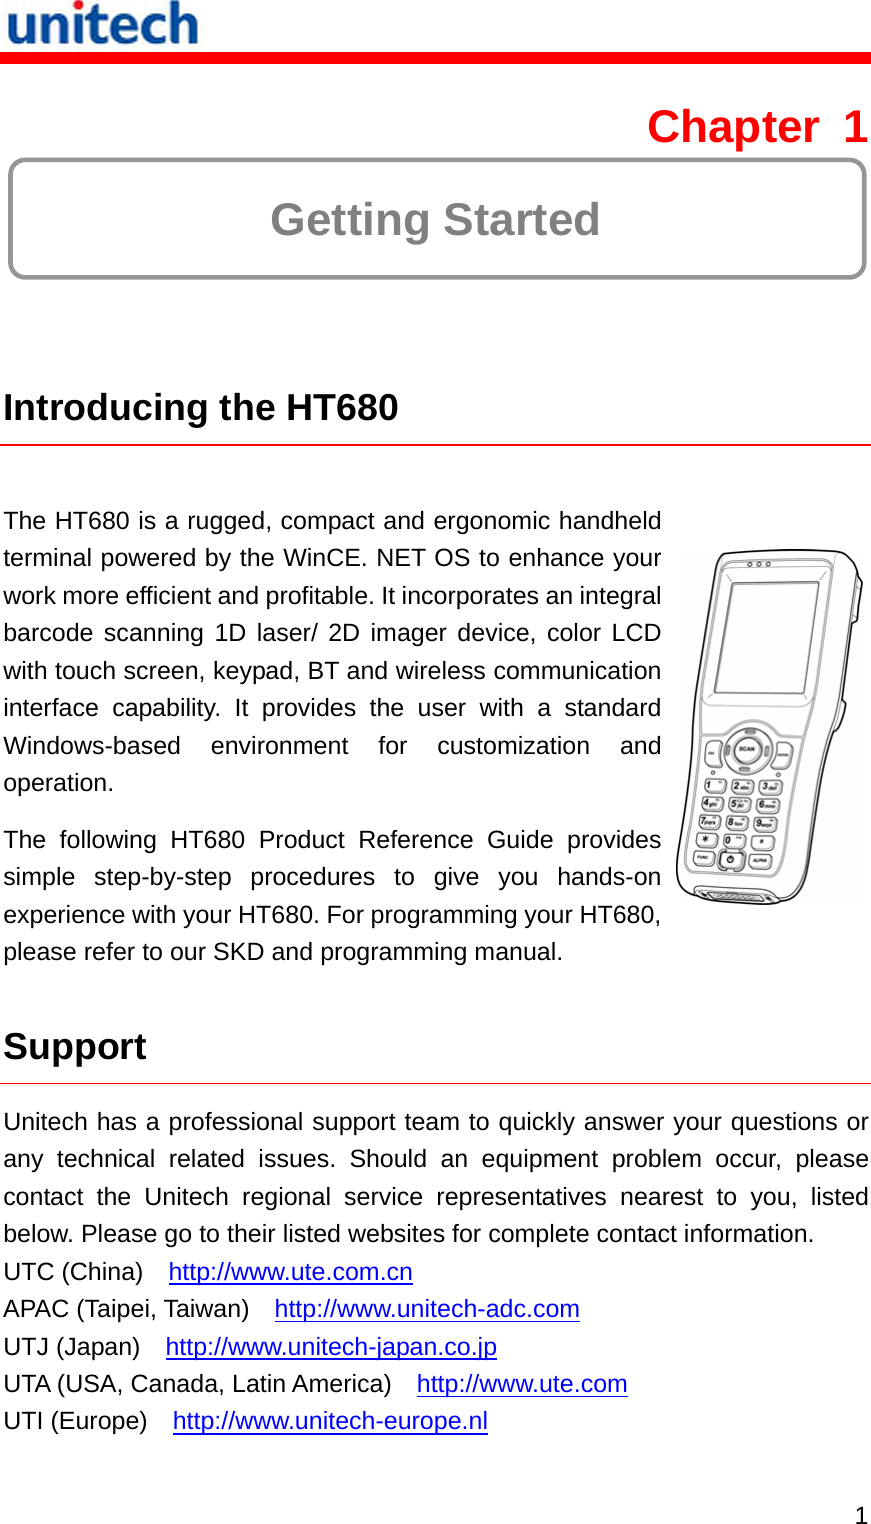   1 Chapter 1  Getting Started  Introducing the HT680  The HT680 is a rugged, compact and ergonomic handheld terminal powered by the WinCE. NET OS to enhance your work more efficient and profitable. It incorporates an integral barcode scanning 1D laser/ 2D imager device, color LCD with touch screen, keypad, BT and wireless communication interface capability. It provides the user with a standard Windows-based environment for customization and operation. The following HT680 Product Reference Guide provides simple step-by-step procedures to give you hands-on experience with your HT680. For programming your HT680, please refer to our SKD and programming manual.  Support Unitech has a professional support team to quickly answer your questions or any technical related issues. Should an equipment problem occur, please contact the Unitech regional service representatives nearest to you, listed below. Please go to their listed websites for complete contact information. UTC (China)    http://www.ute.com.cn APAC (Taipei, Taiwan)    http://www.unitech-adc.com UTJ (Japan)    http://www.unitech-japan.co.jp UTA (USA, Canada, Latin America)    http://www.ute.com UTI (Europe)    http://www.unitech-europe.nl 